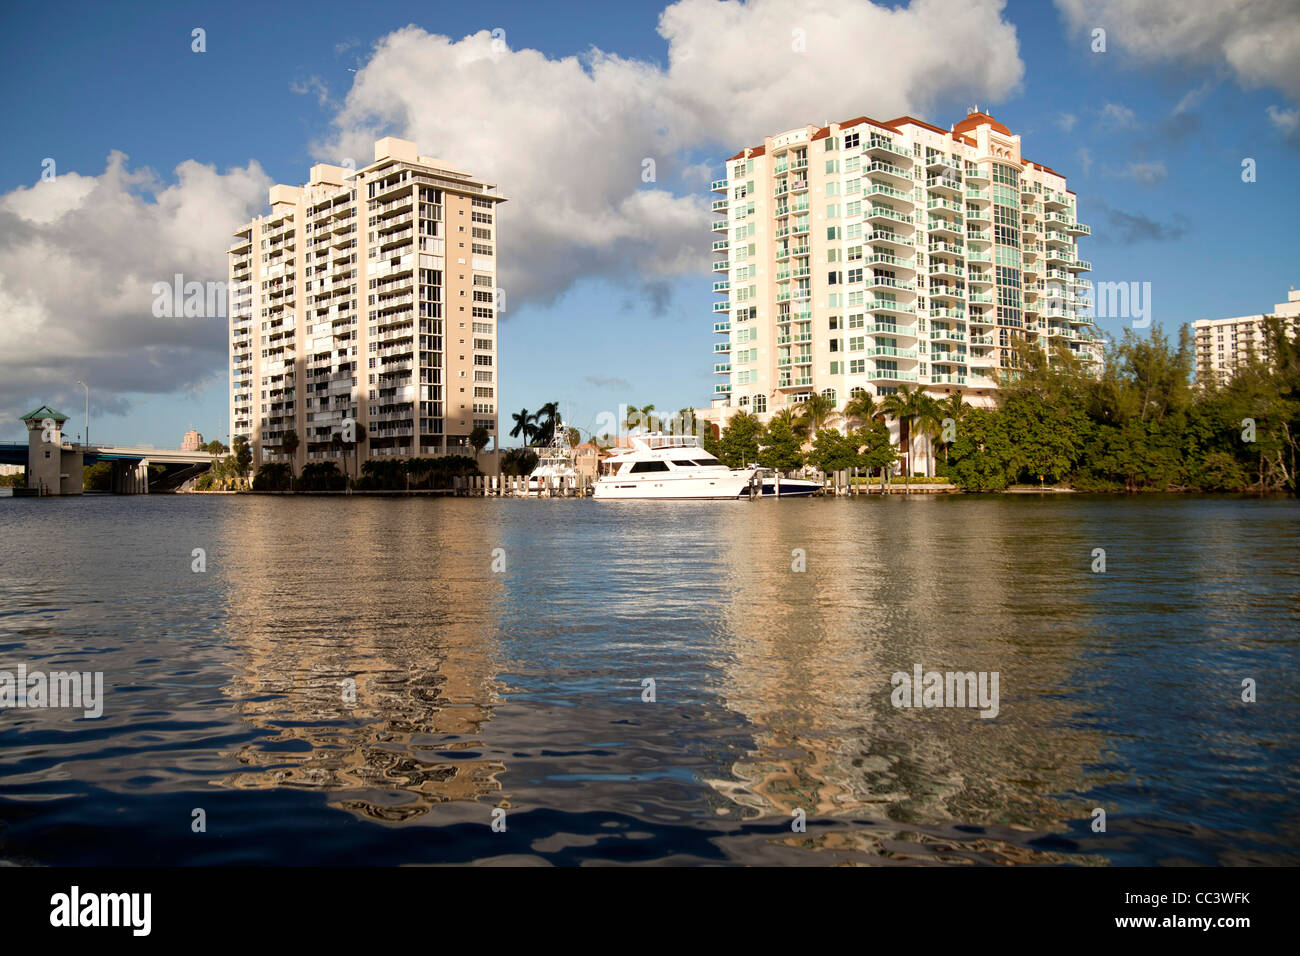 Apartment buildings on the canal in the town centre of Fort Lauderdale, Broward County, Florida, USA Stock Photo